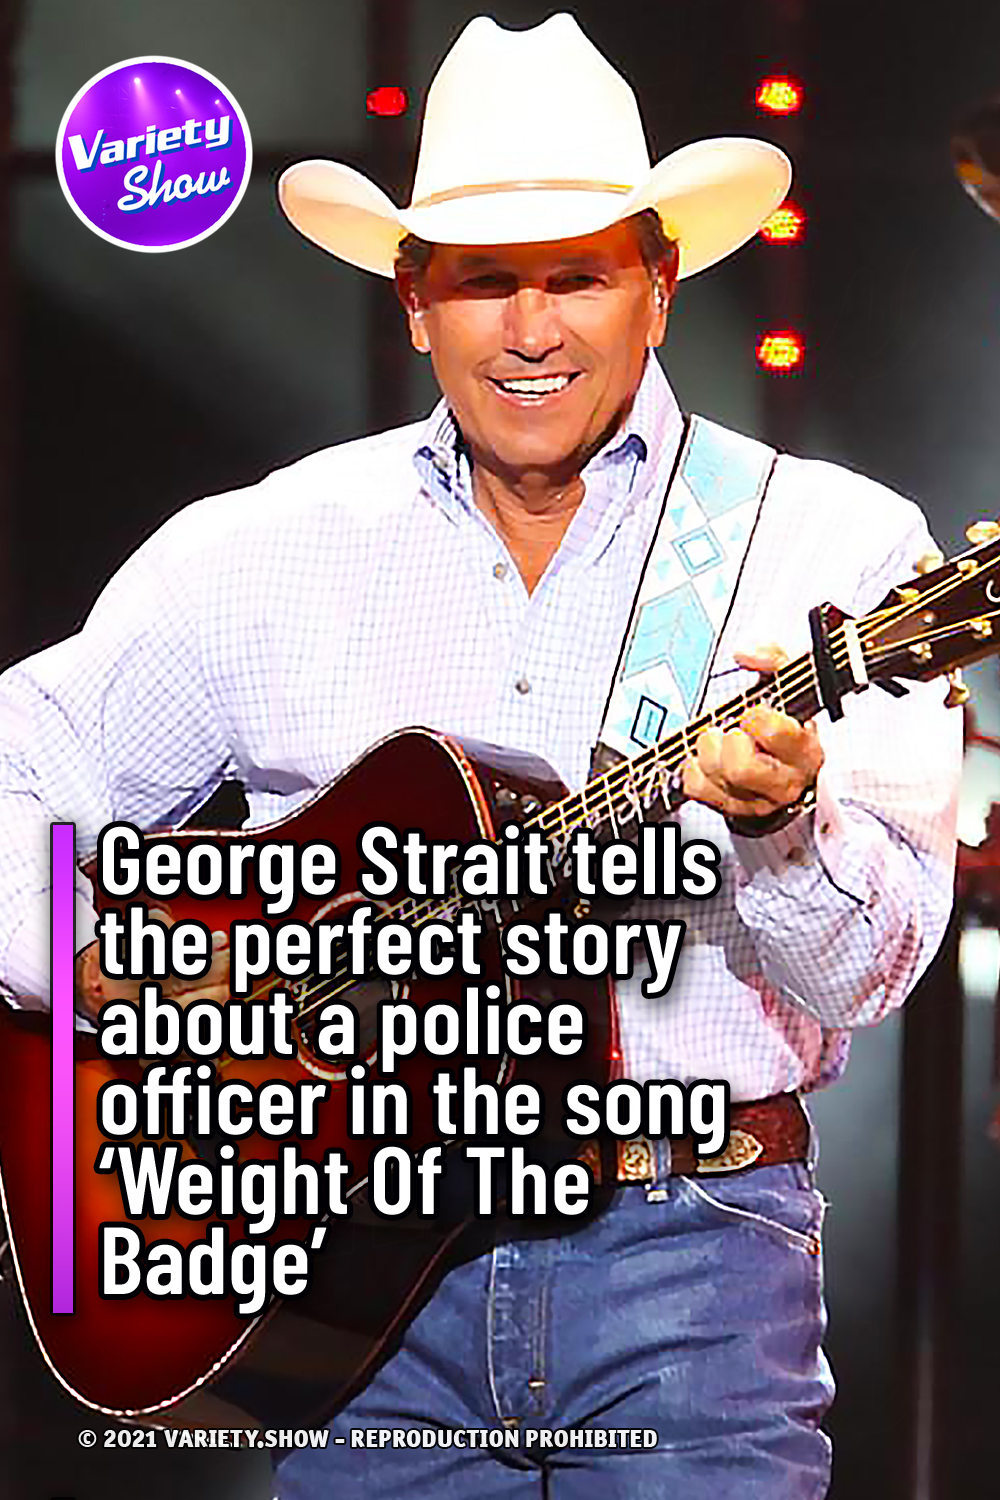 George Strait tells the perfect story about a police officer in the song ‘Weight Of The Badge’